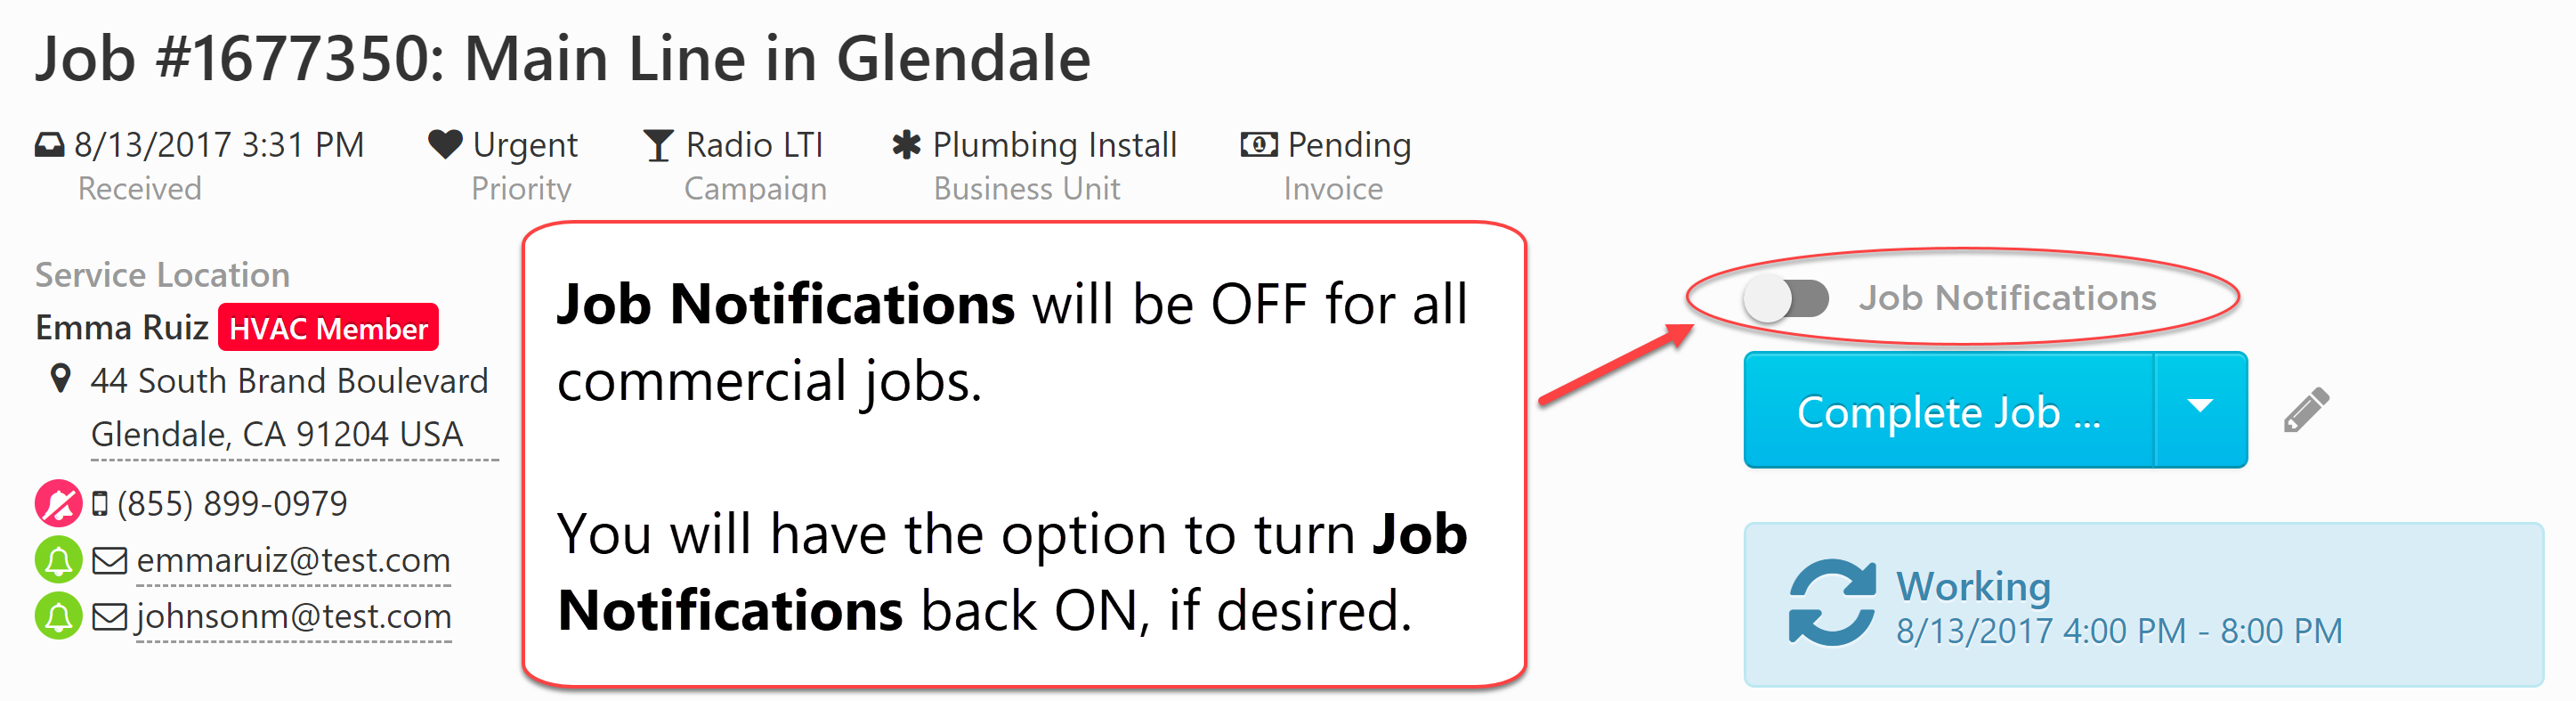 job-notifications-off-commercial.png